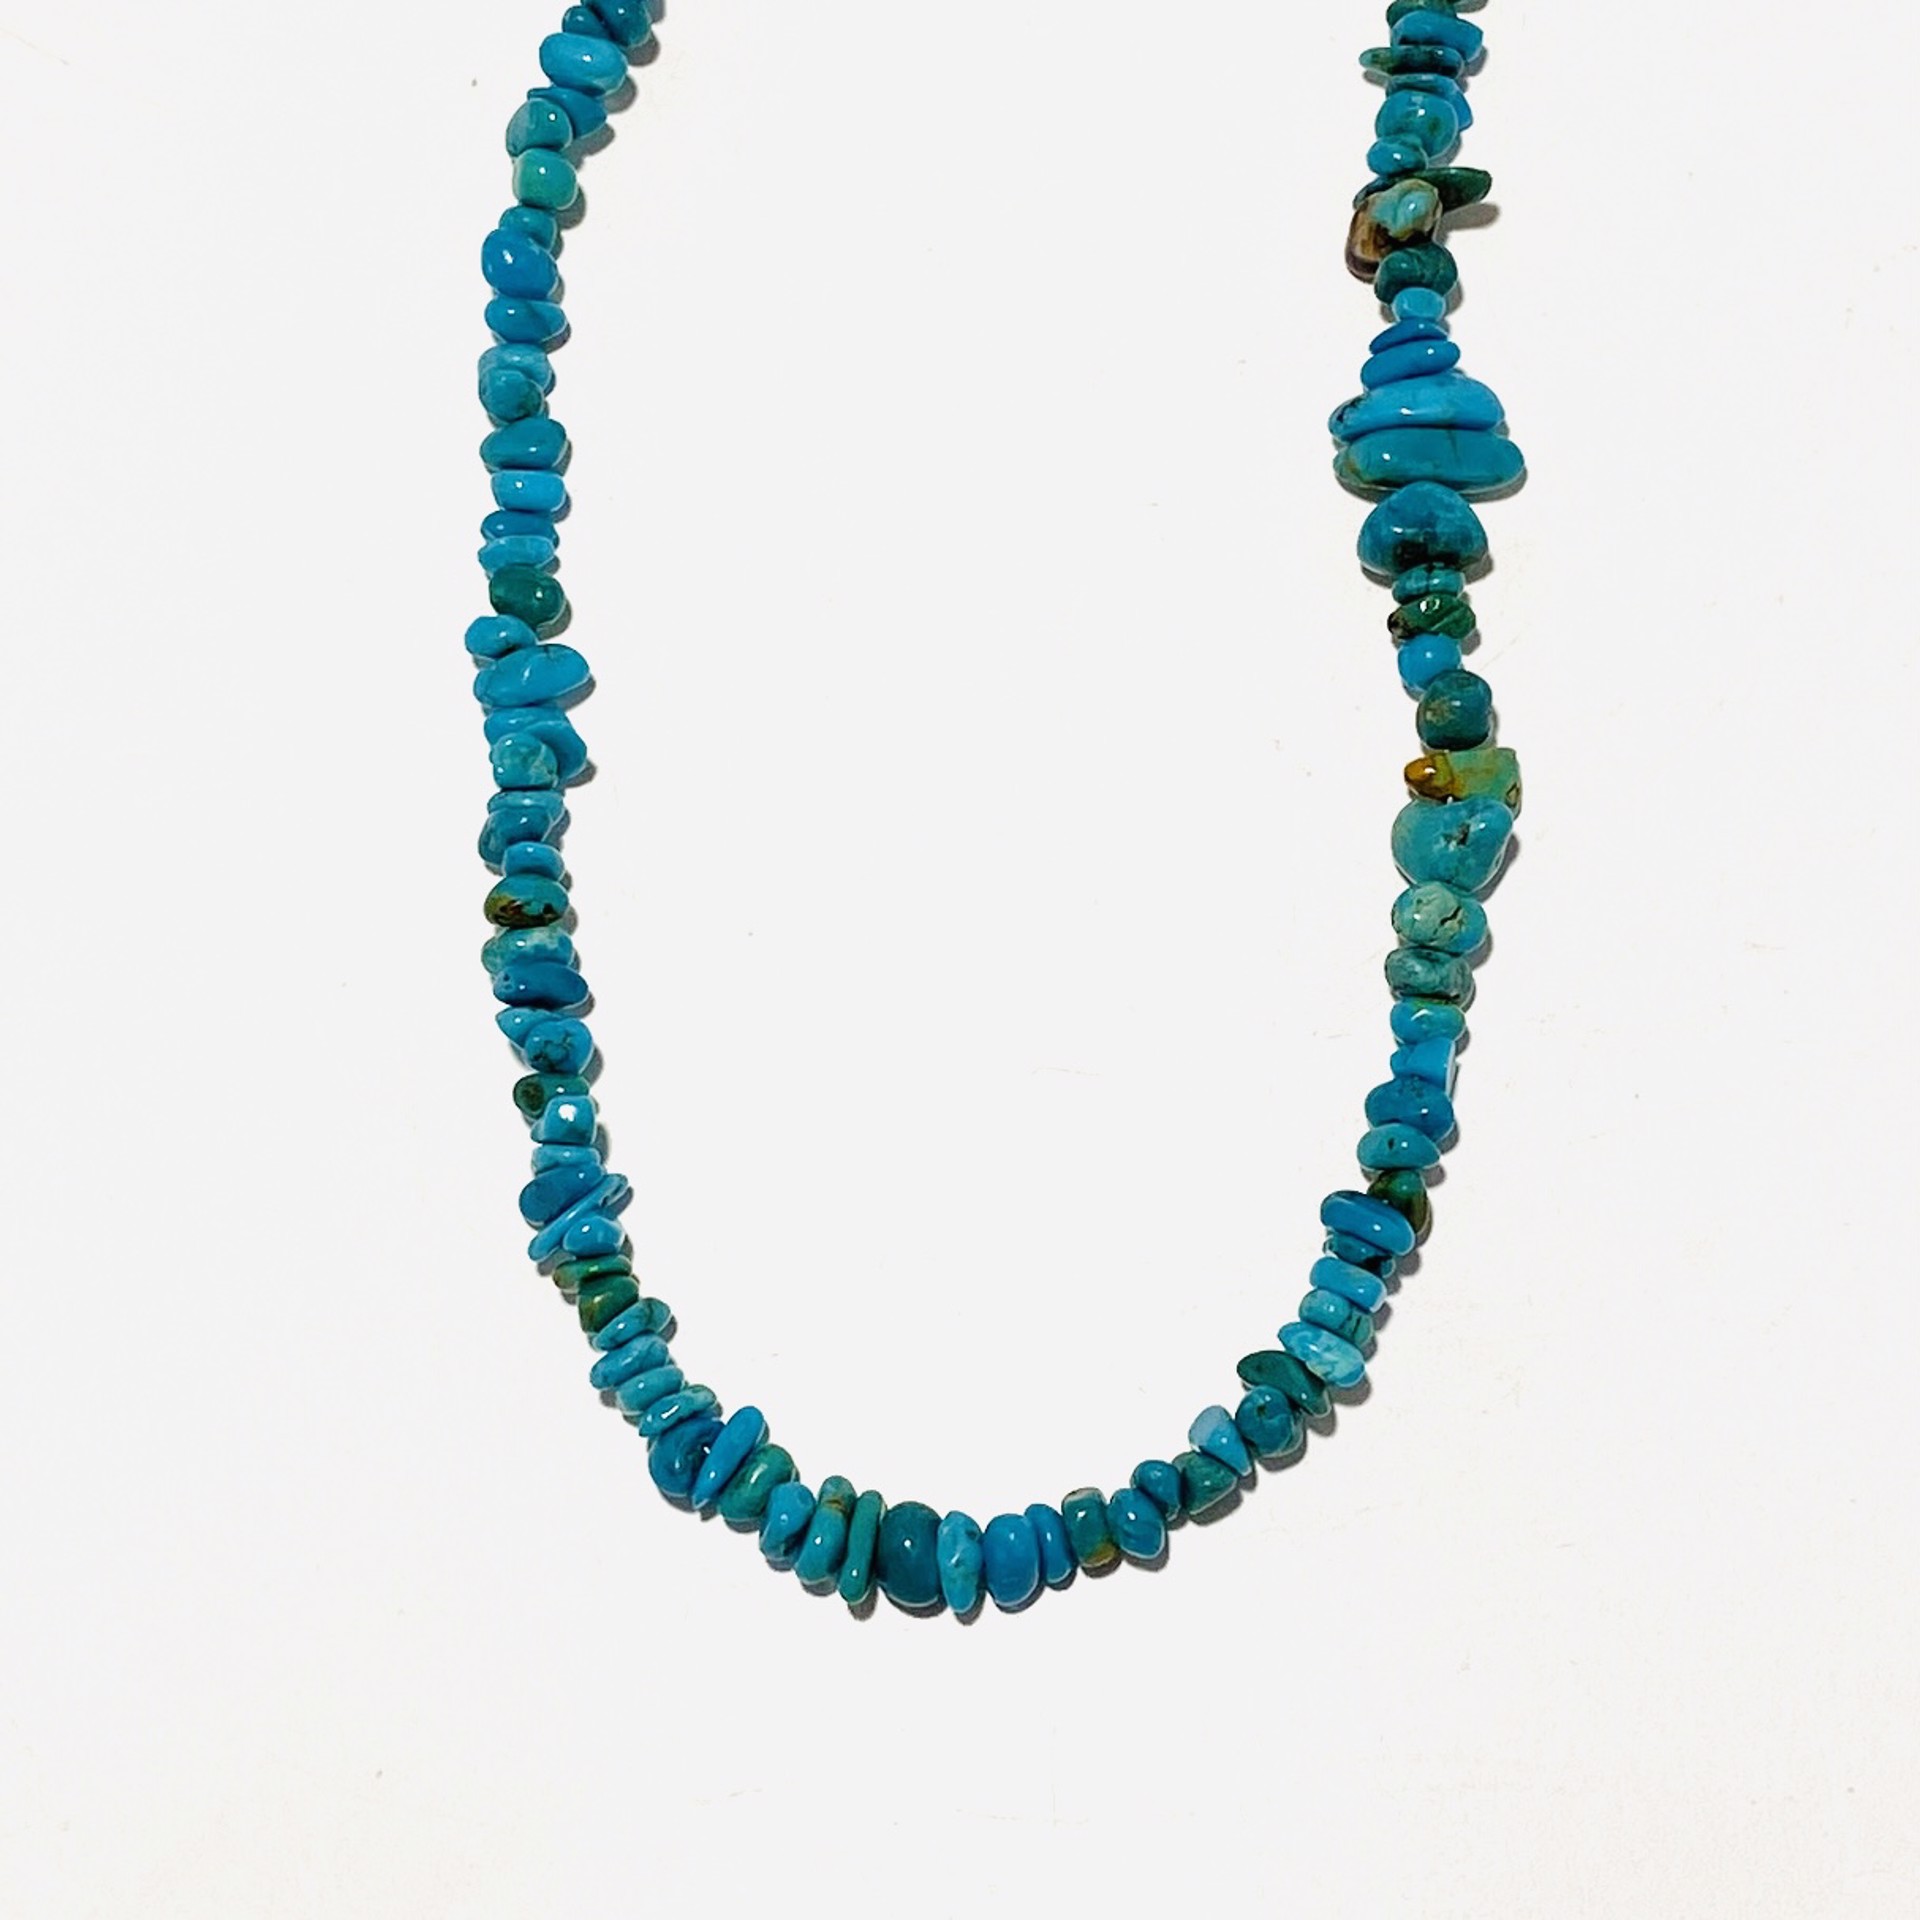 American Turquoise Strand Necklace NT22-195 by Nance Trueworthy